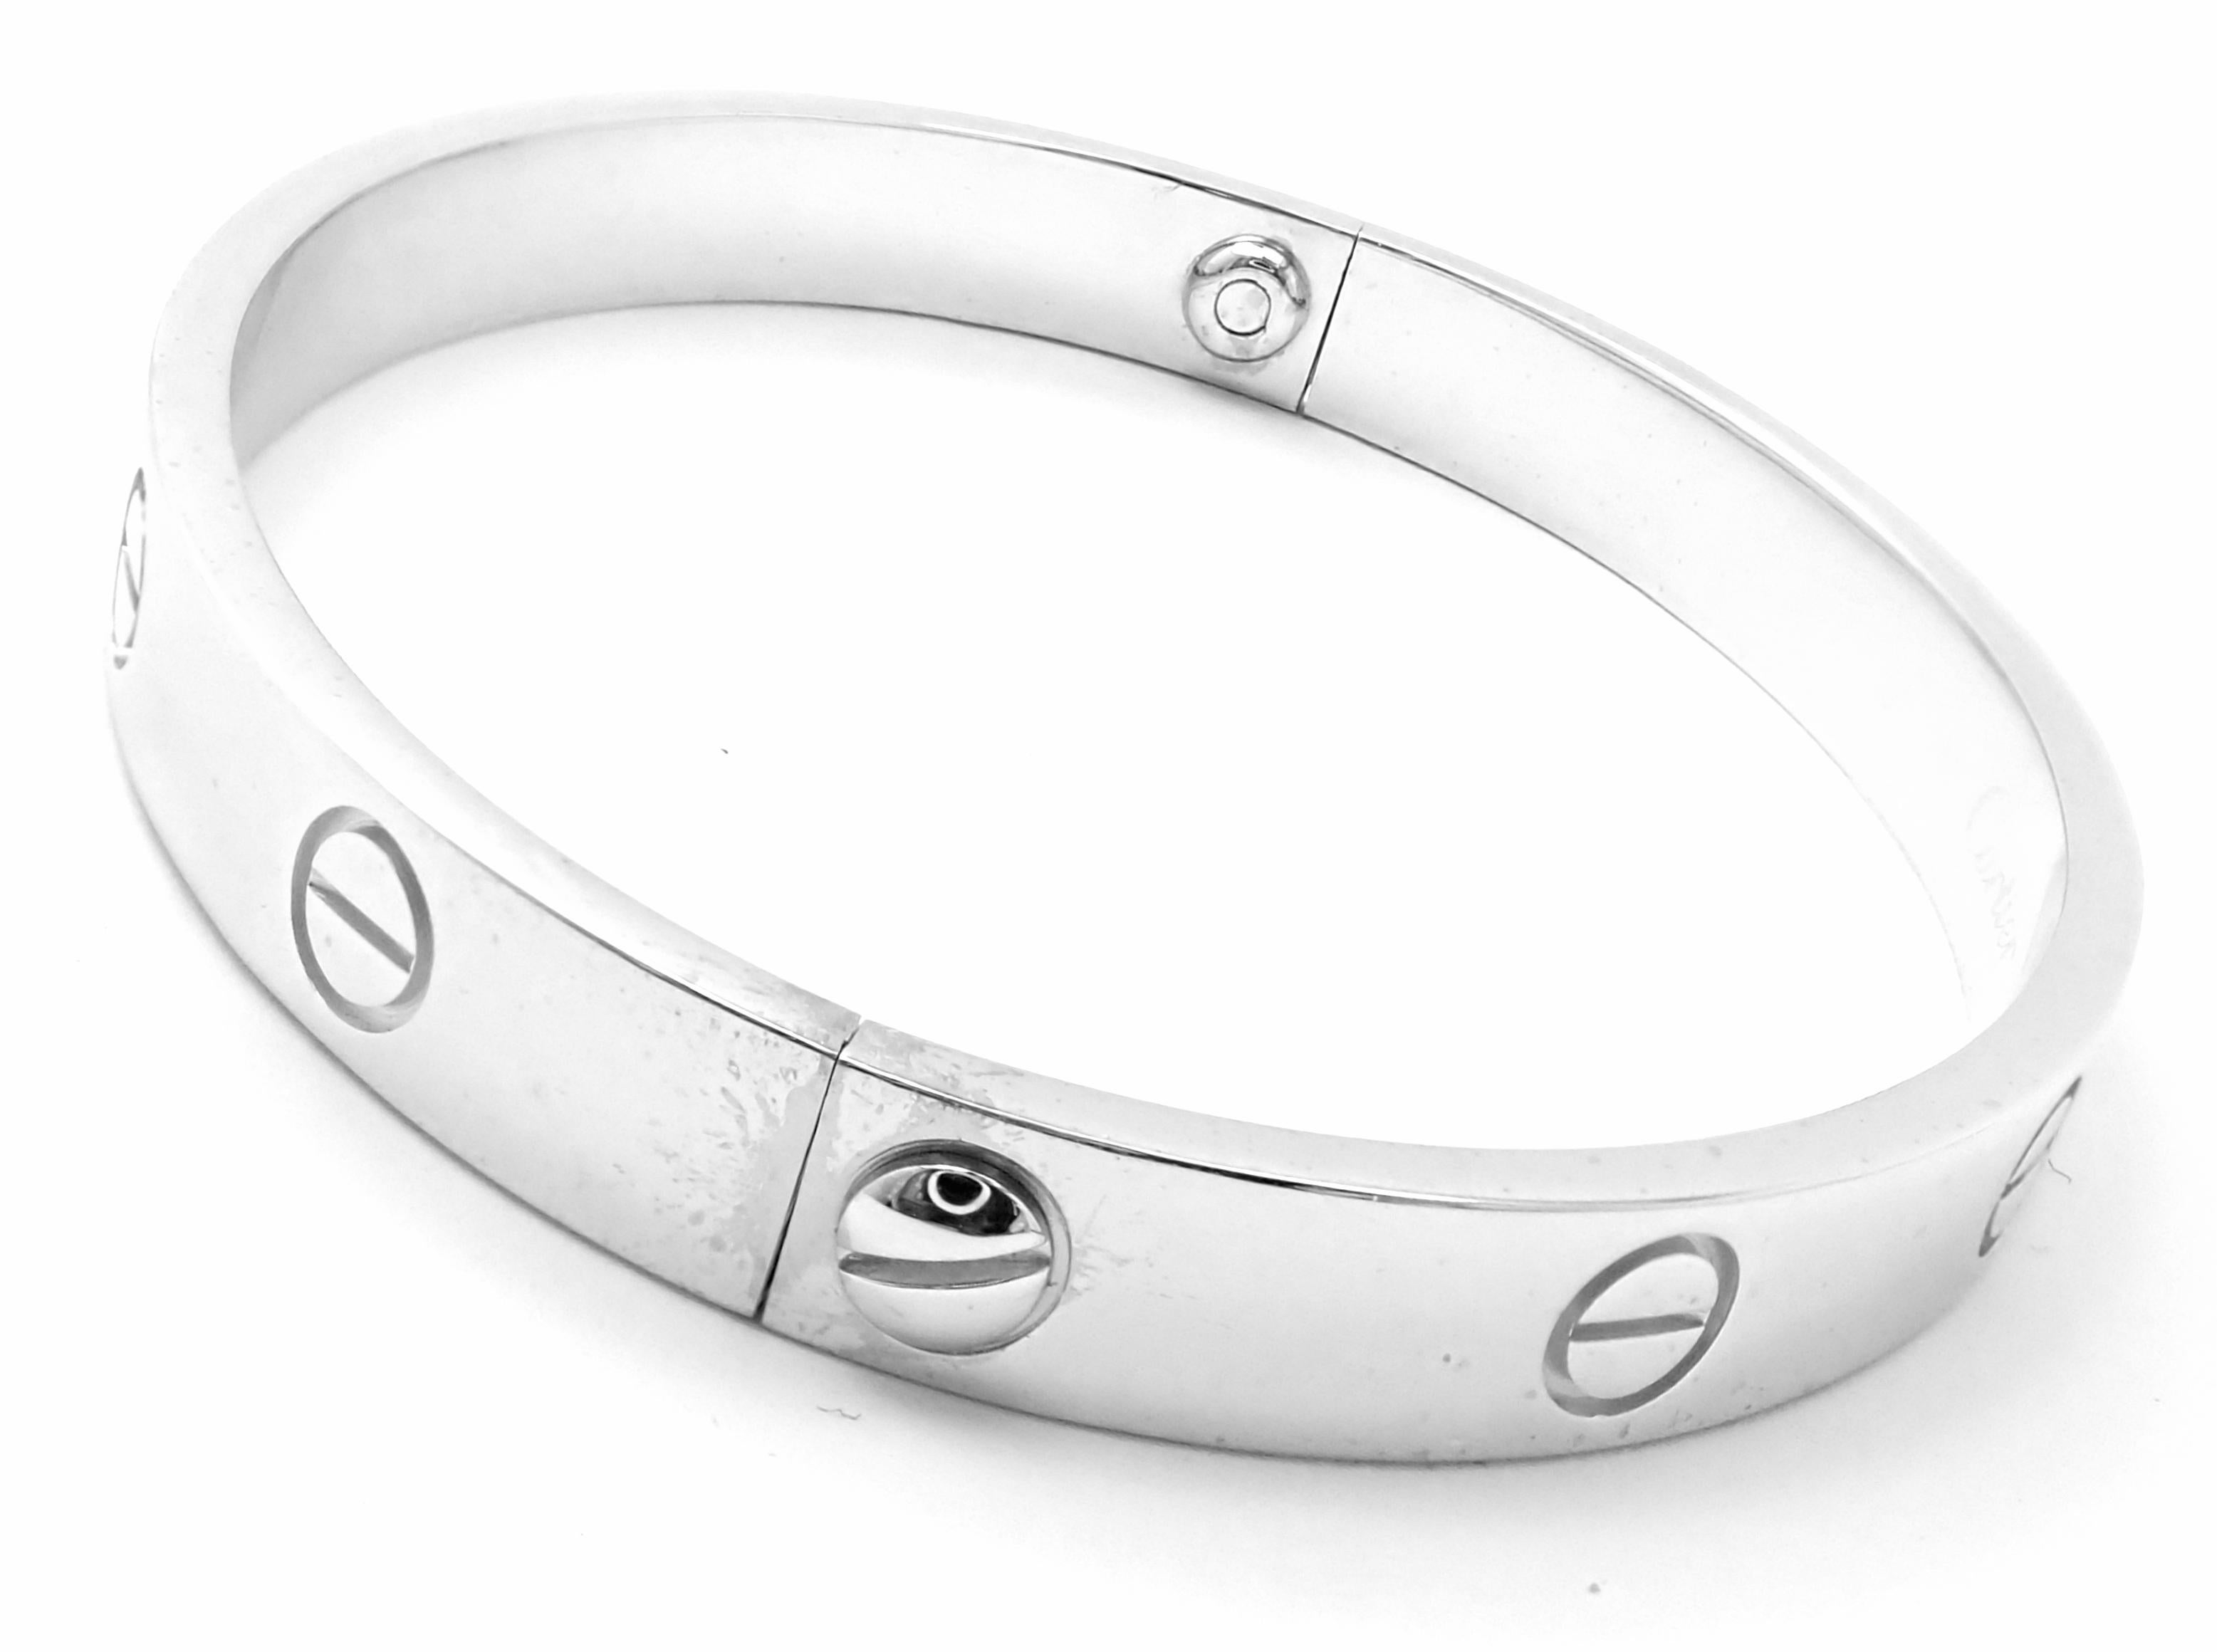 18k White Gold Love Bangle Bracelet by Cartier. Size 17. 
This bracelet comes with Cartier box and Cartier screwdriver.
Details: Size: 17 
Weight: 34.1 grams
Width: 6.5mm 
Hallmarks: Cartier 750 17 1993 K8XXXX(serial number omitted)
*Free Shipping